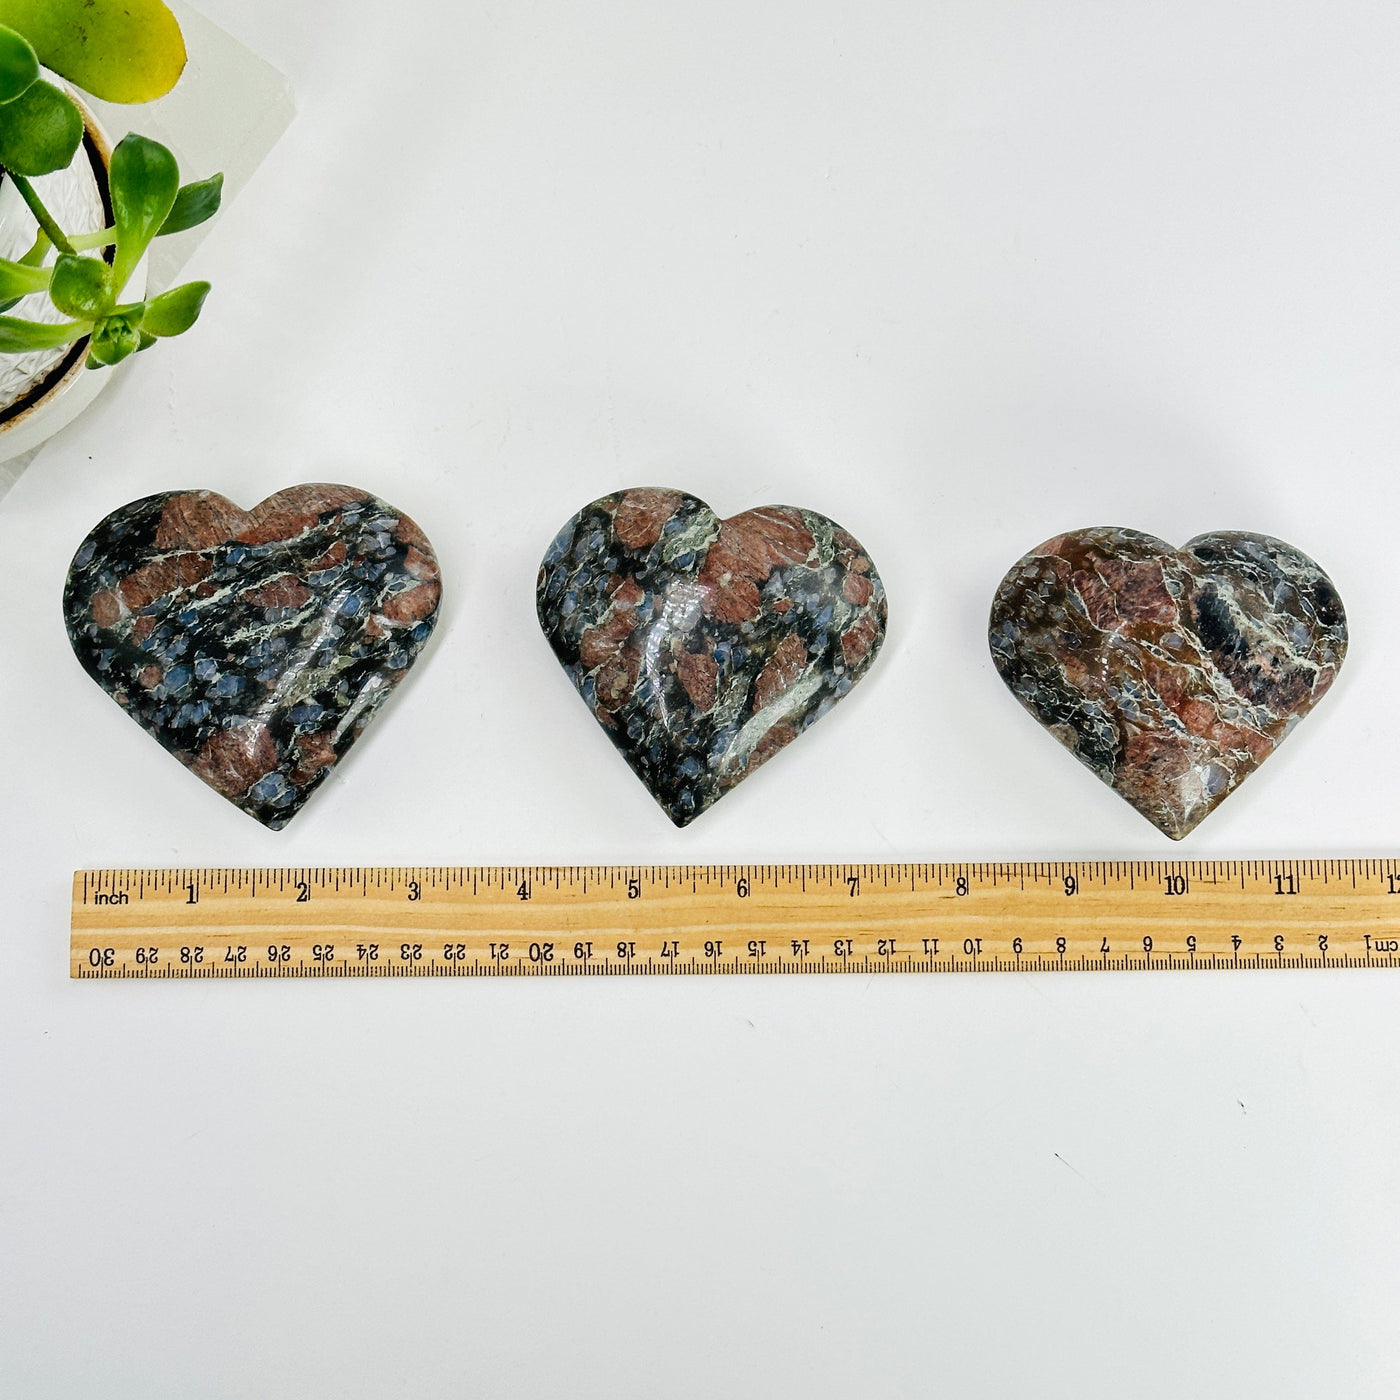 3 rhyolite hearts next to a ruler for size reference